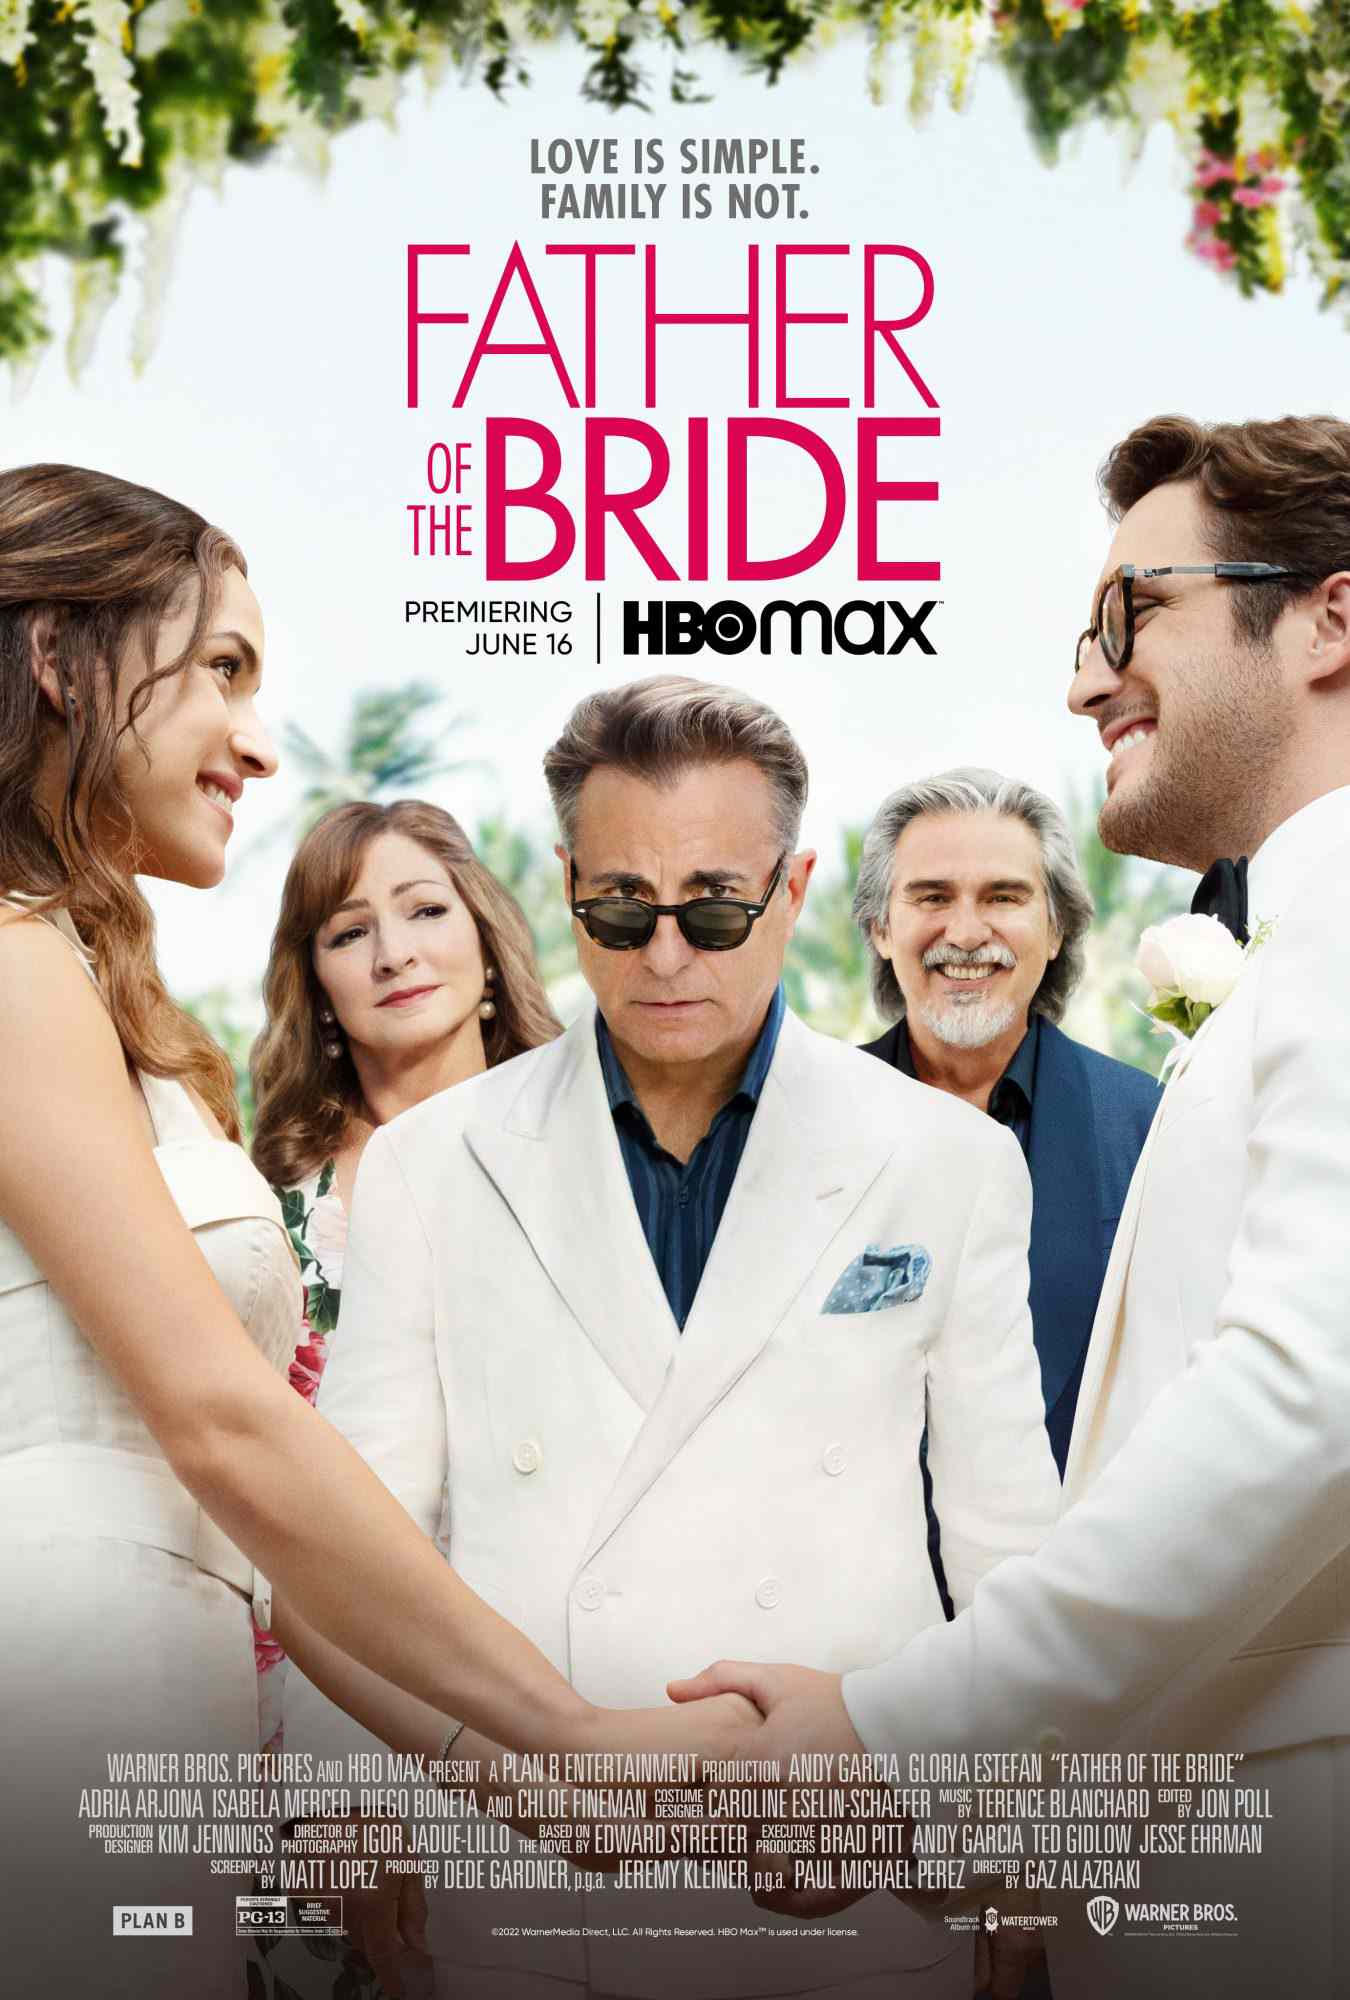 Andy Garcia and Gloria Estefan on Working Together for Father of the Bride —Warner Bros. Pictures